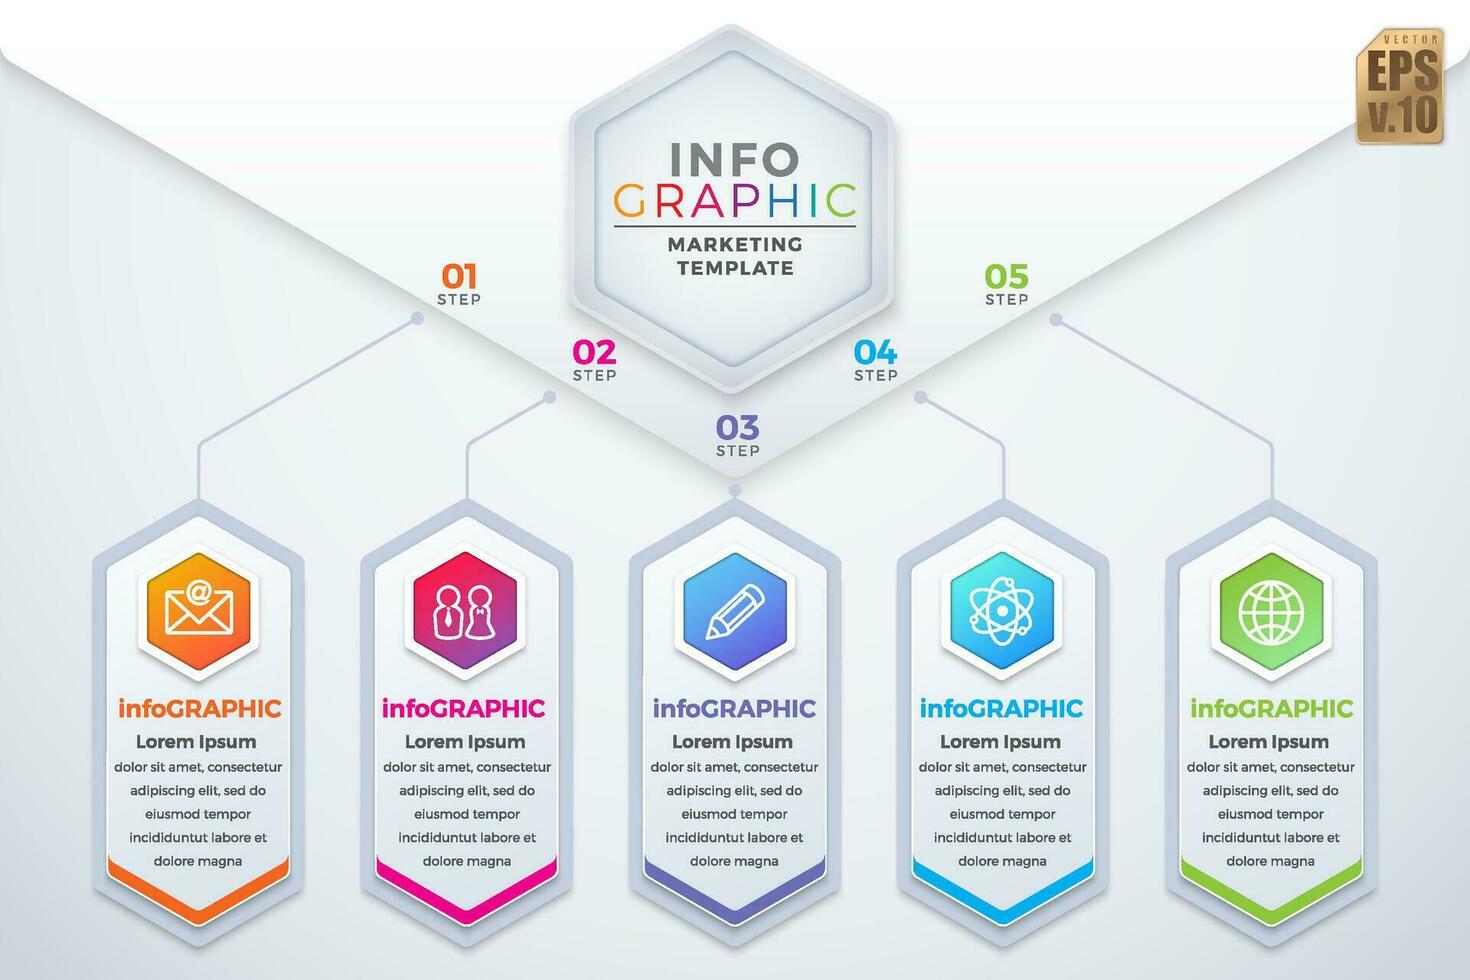 Infographic business design hexagon icons colorful marketing template vector. 5 options or steps isolated. You can used for Marketing process, workflow presentations layout, flow chart. vector